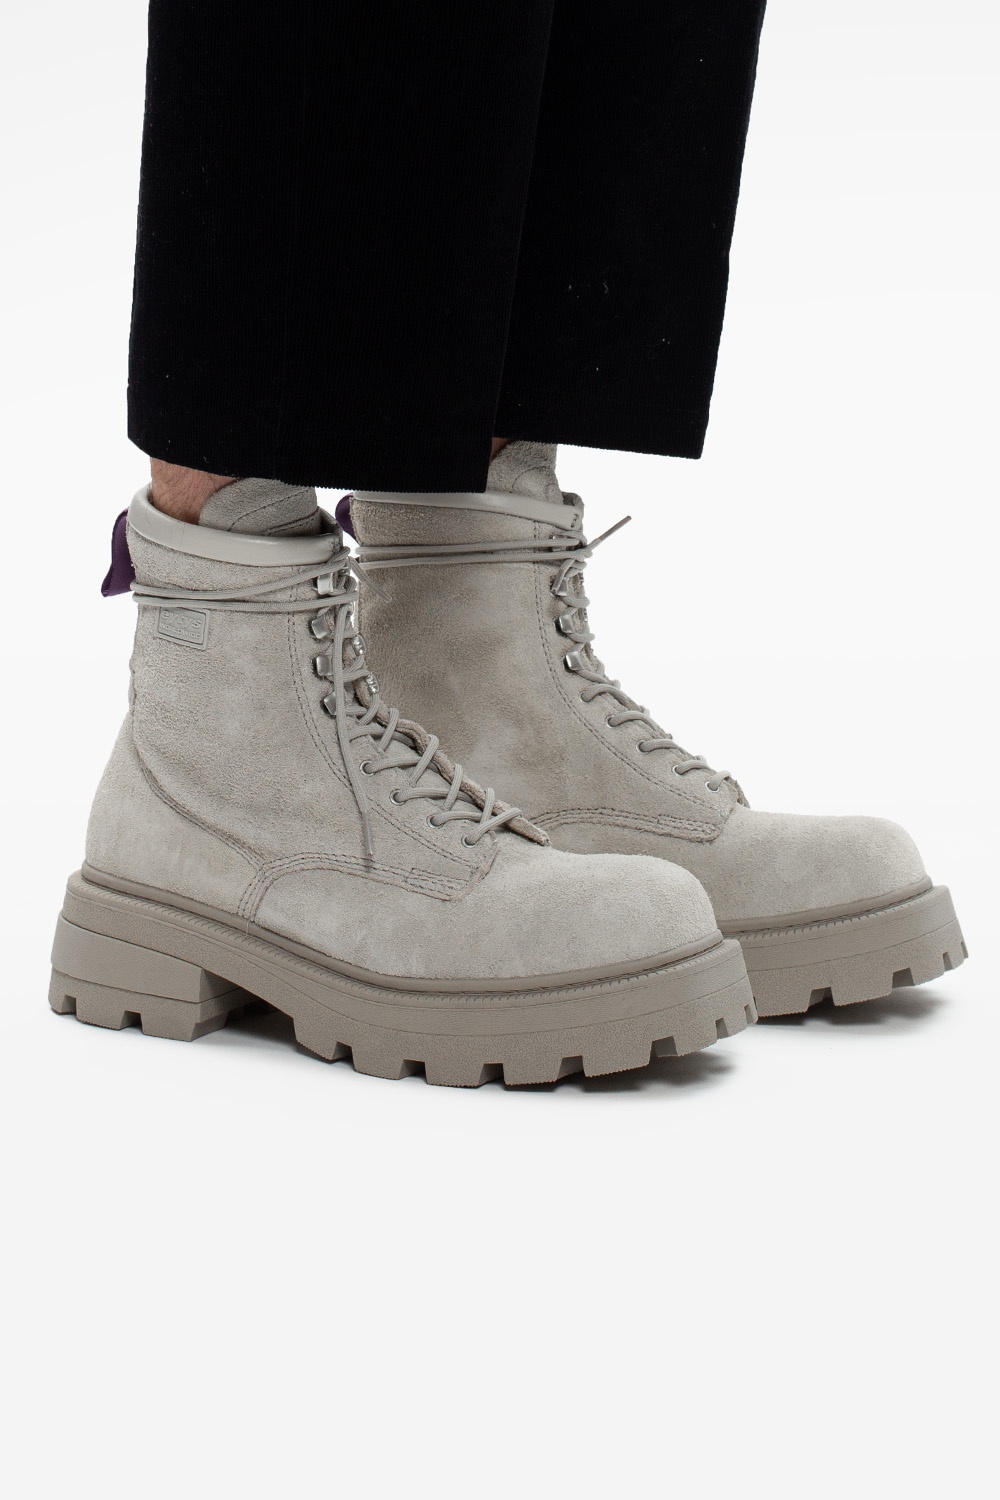 Athletic Shoe Cleanser - 'Michigan' platform boots Eytys ...